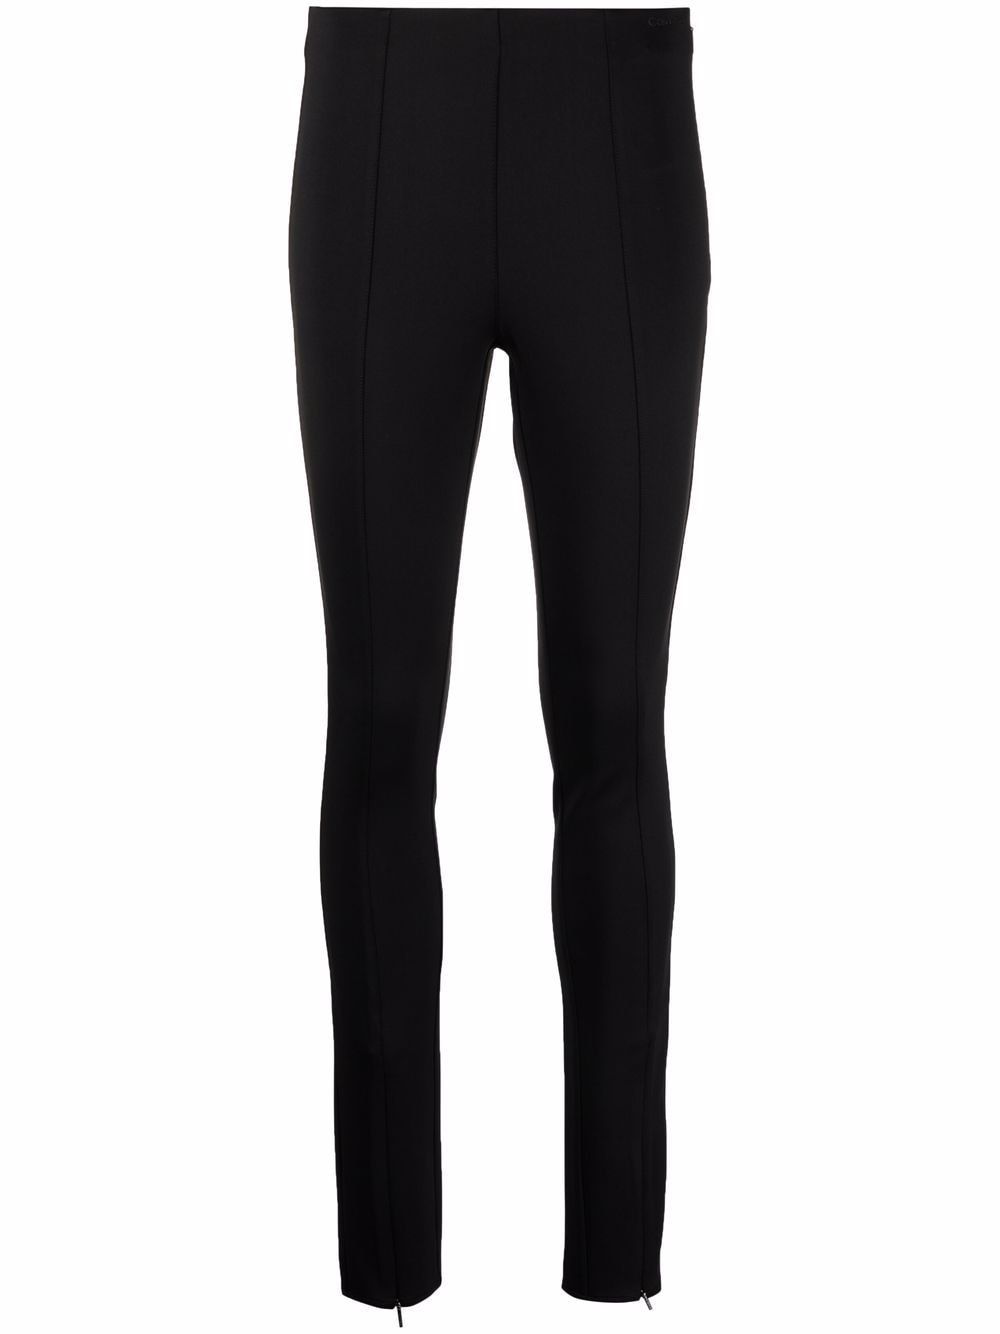 Image 1 of Calvin Klein high-waisted skinny trousers